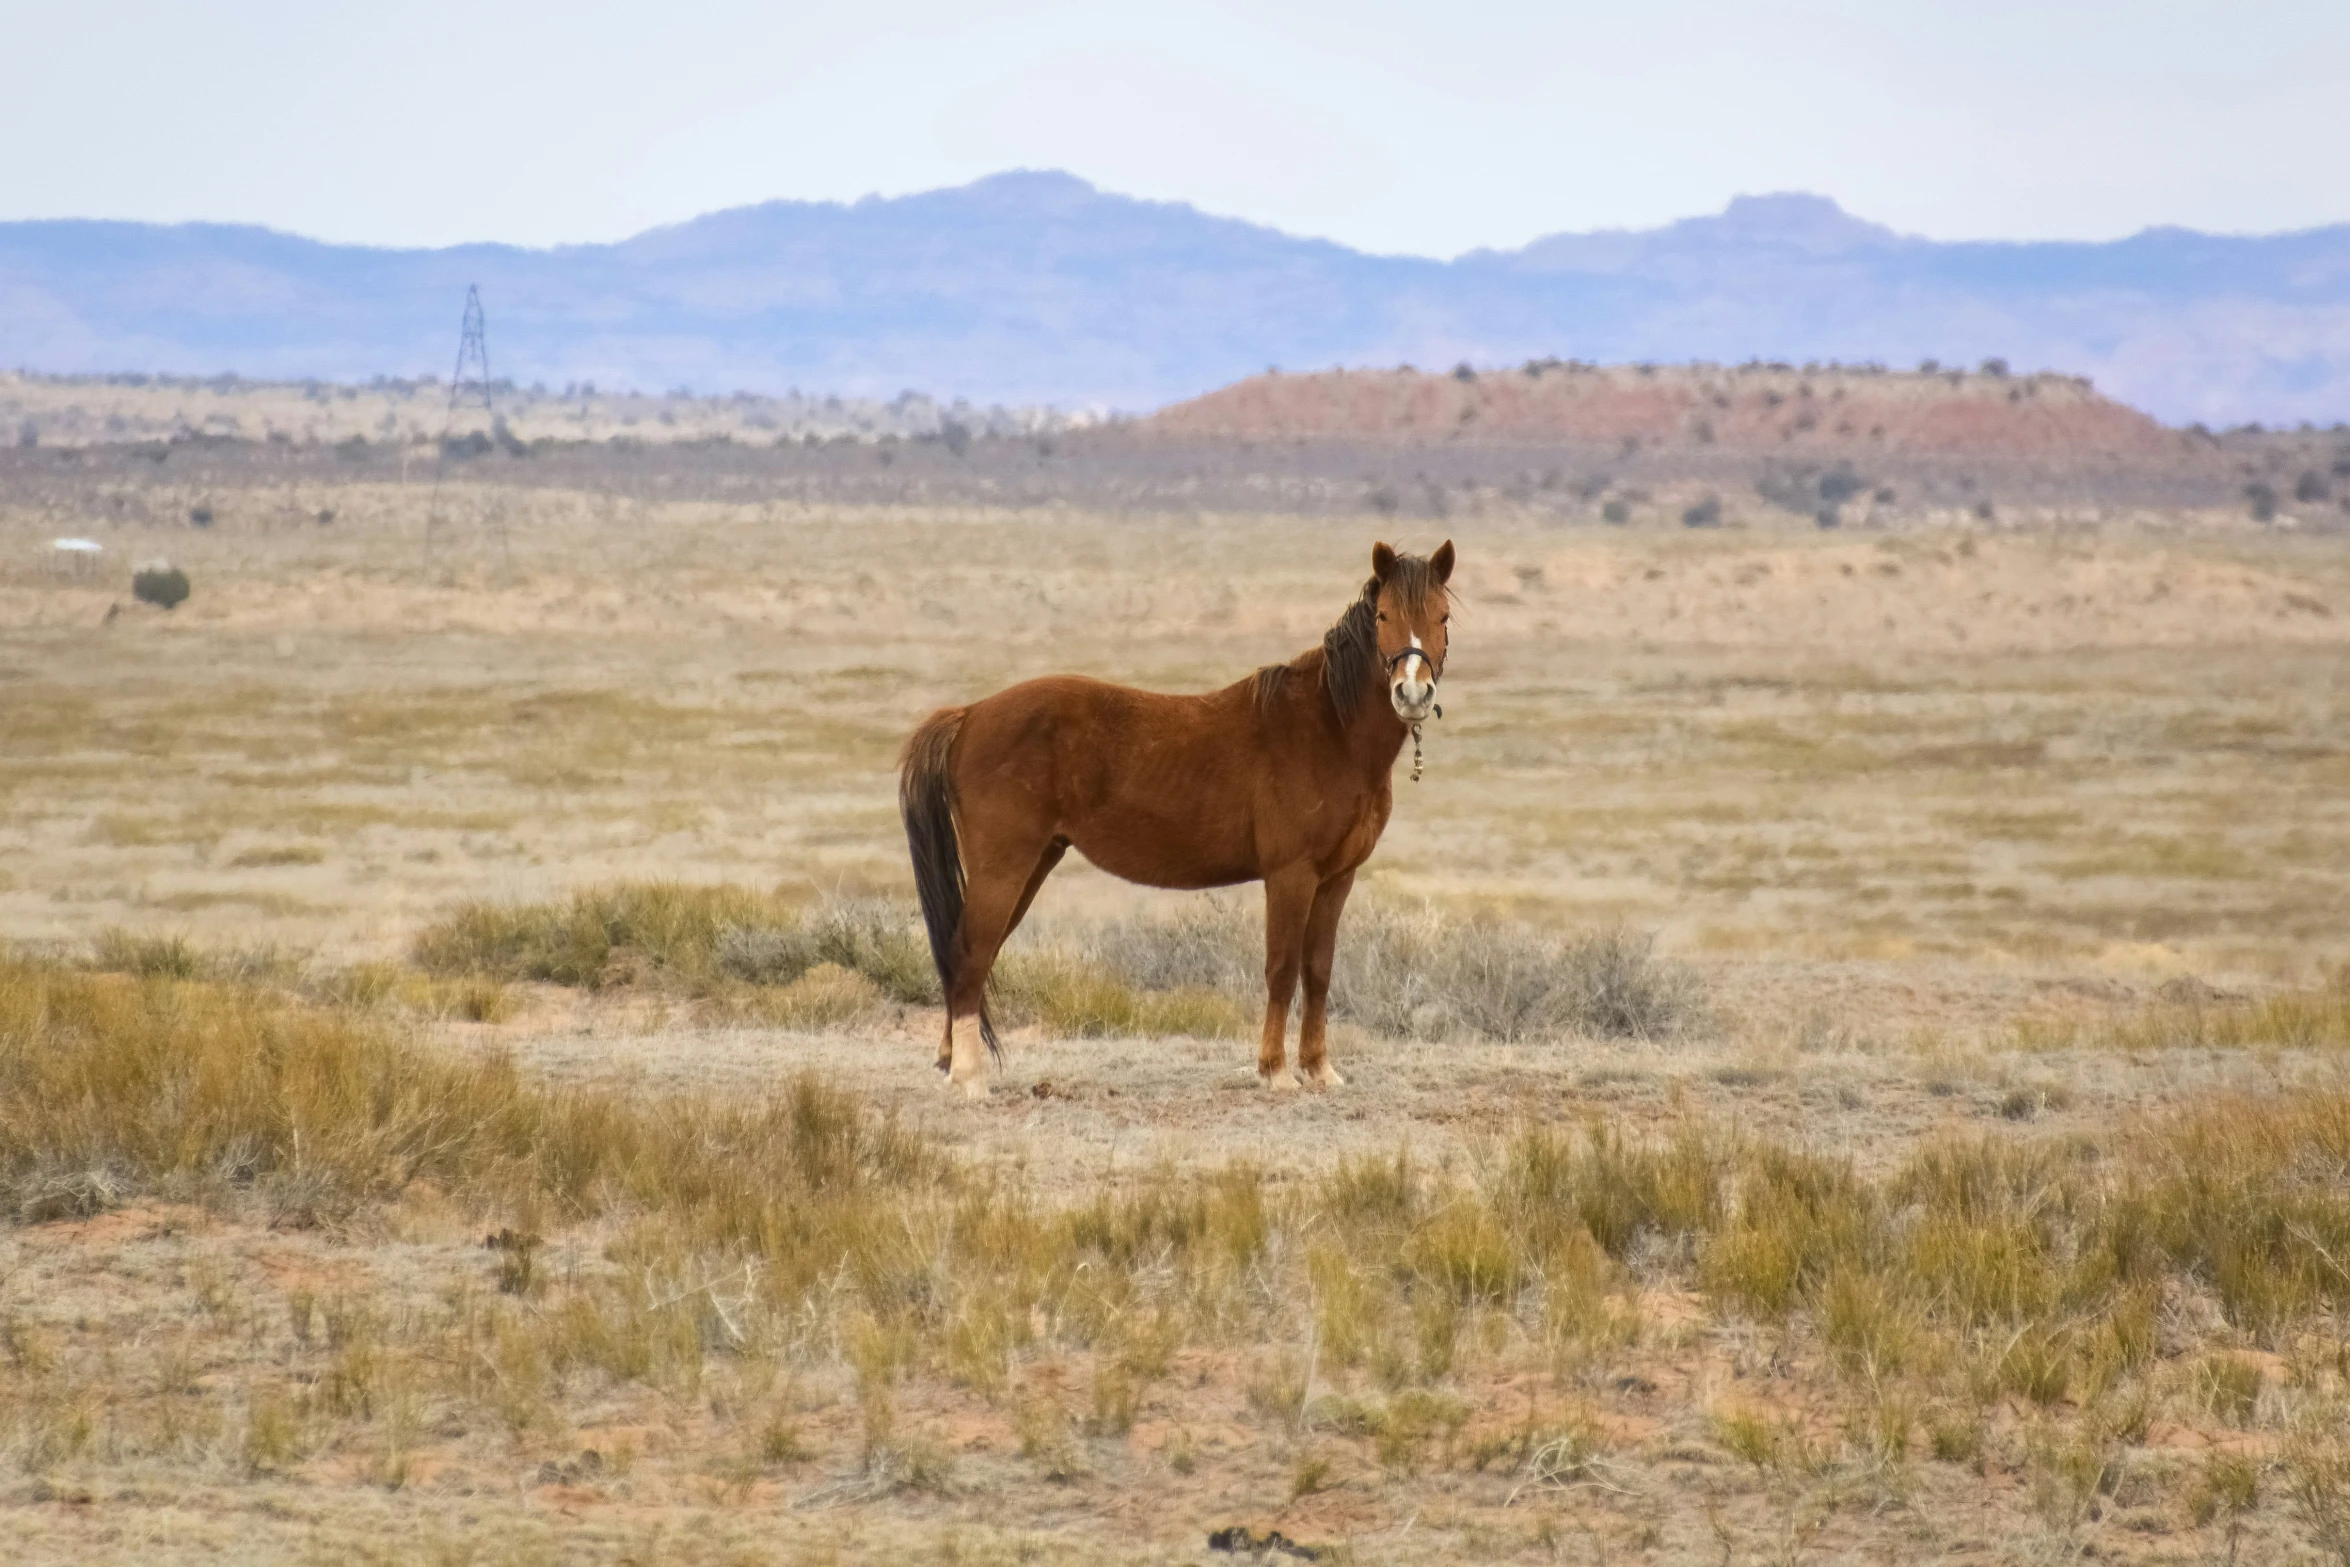 the horse is standing alone in the desert looking at its surroundings